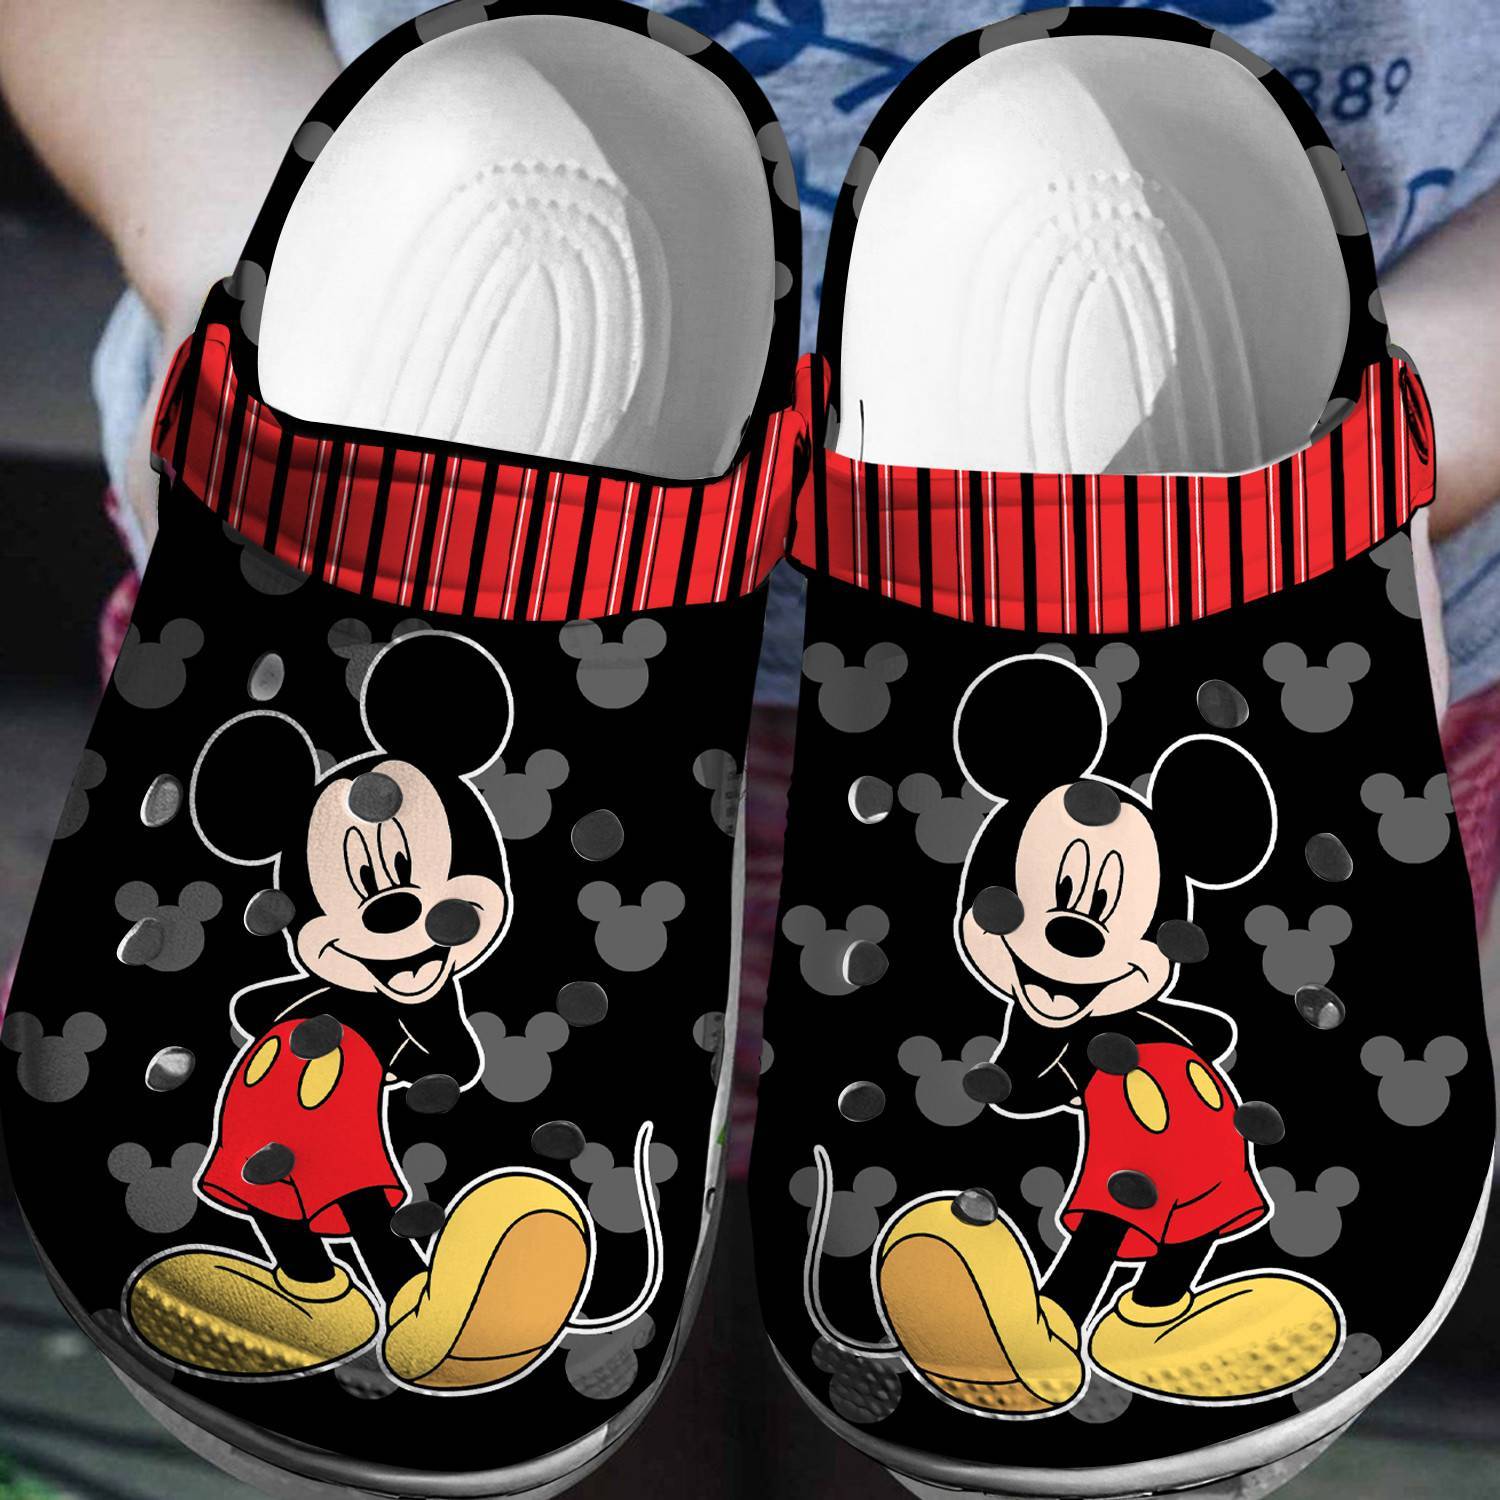 Whimsical Fun: Mickey Mouse 3D Clog Shoes